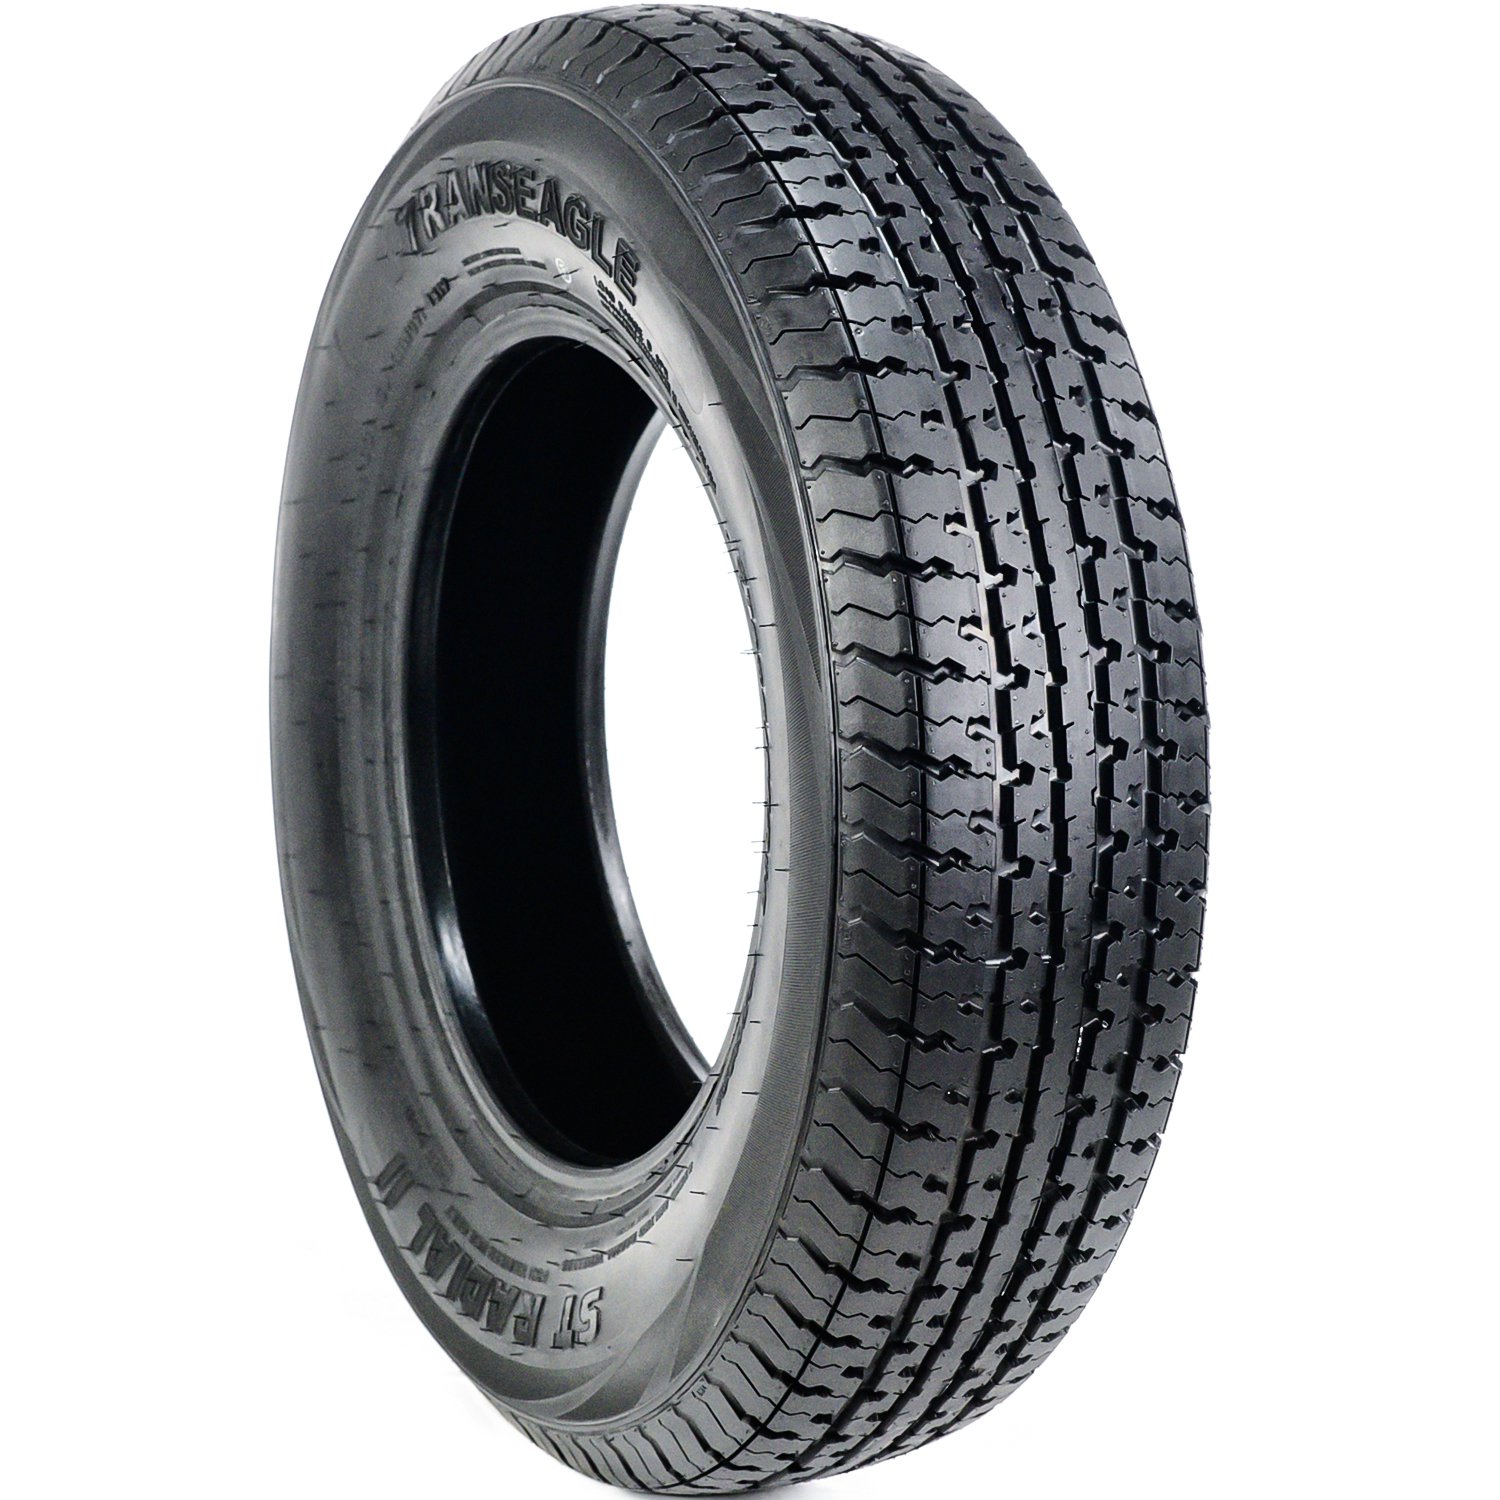 Transeagle ST Radial II Steel Belted ST 235/80R16 Load E 10 Ply Trailer Tire